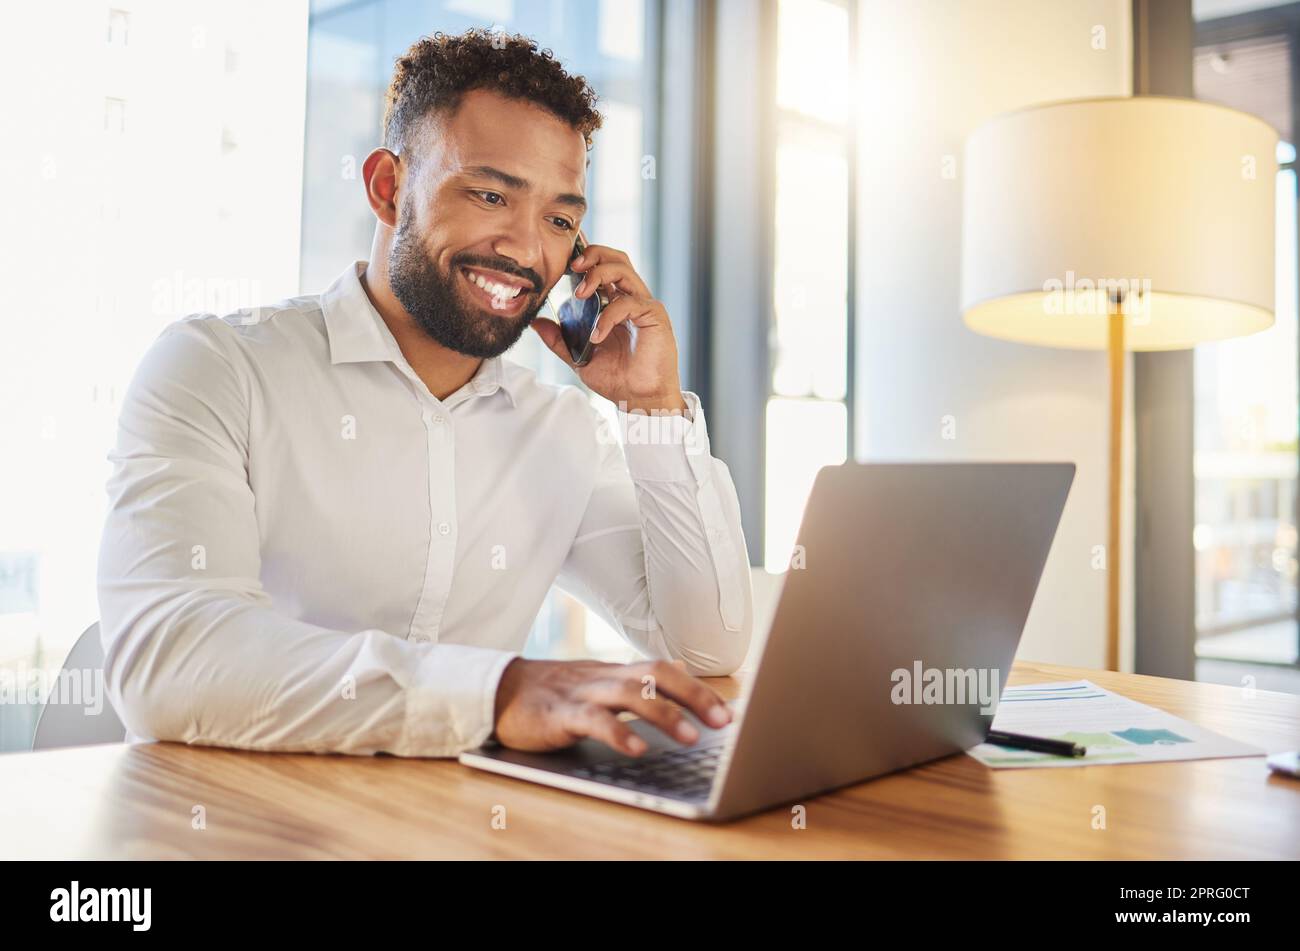 Management, planning and networking phone call by happy business man. Talking to client while working on a laptop in corporate office. Professional worker checking an online calendar for appointment Stock Photo